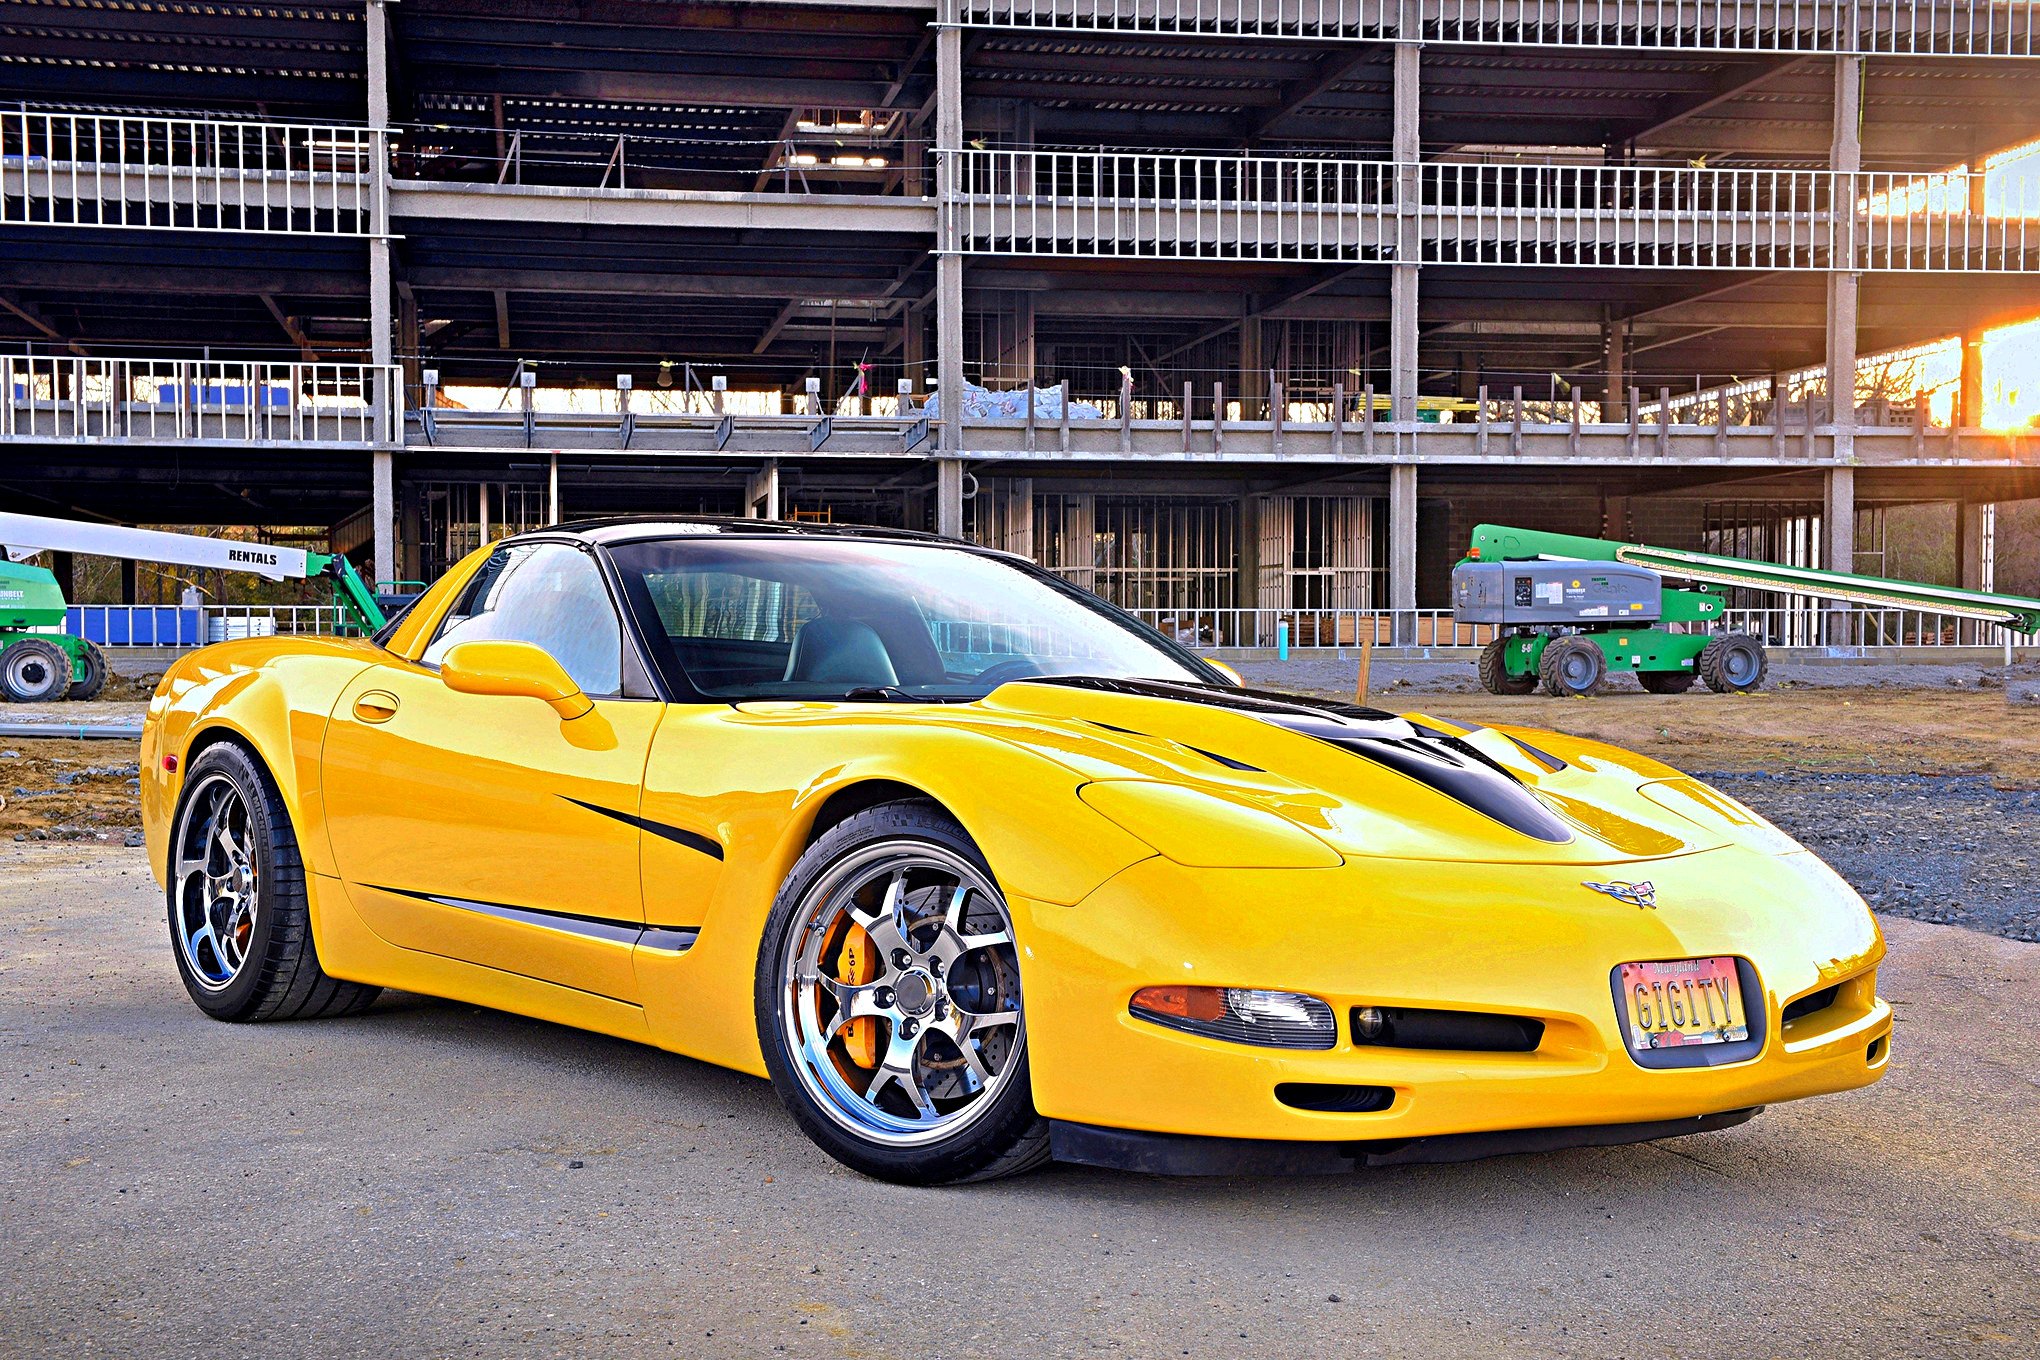 Yellow Chevy Corvette with Aftermarket Vented Hood - Photo by Scotty Lachenauer